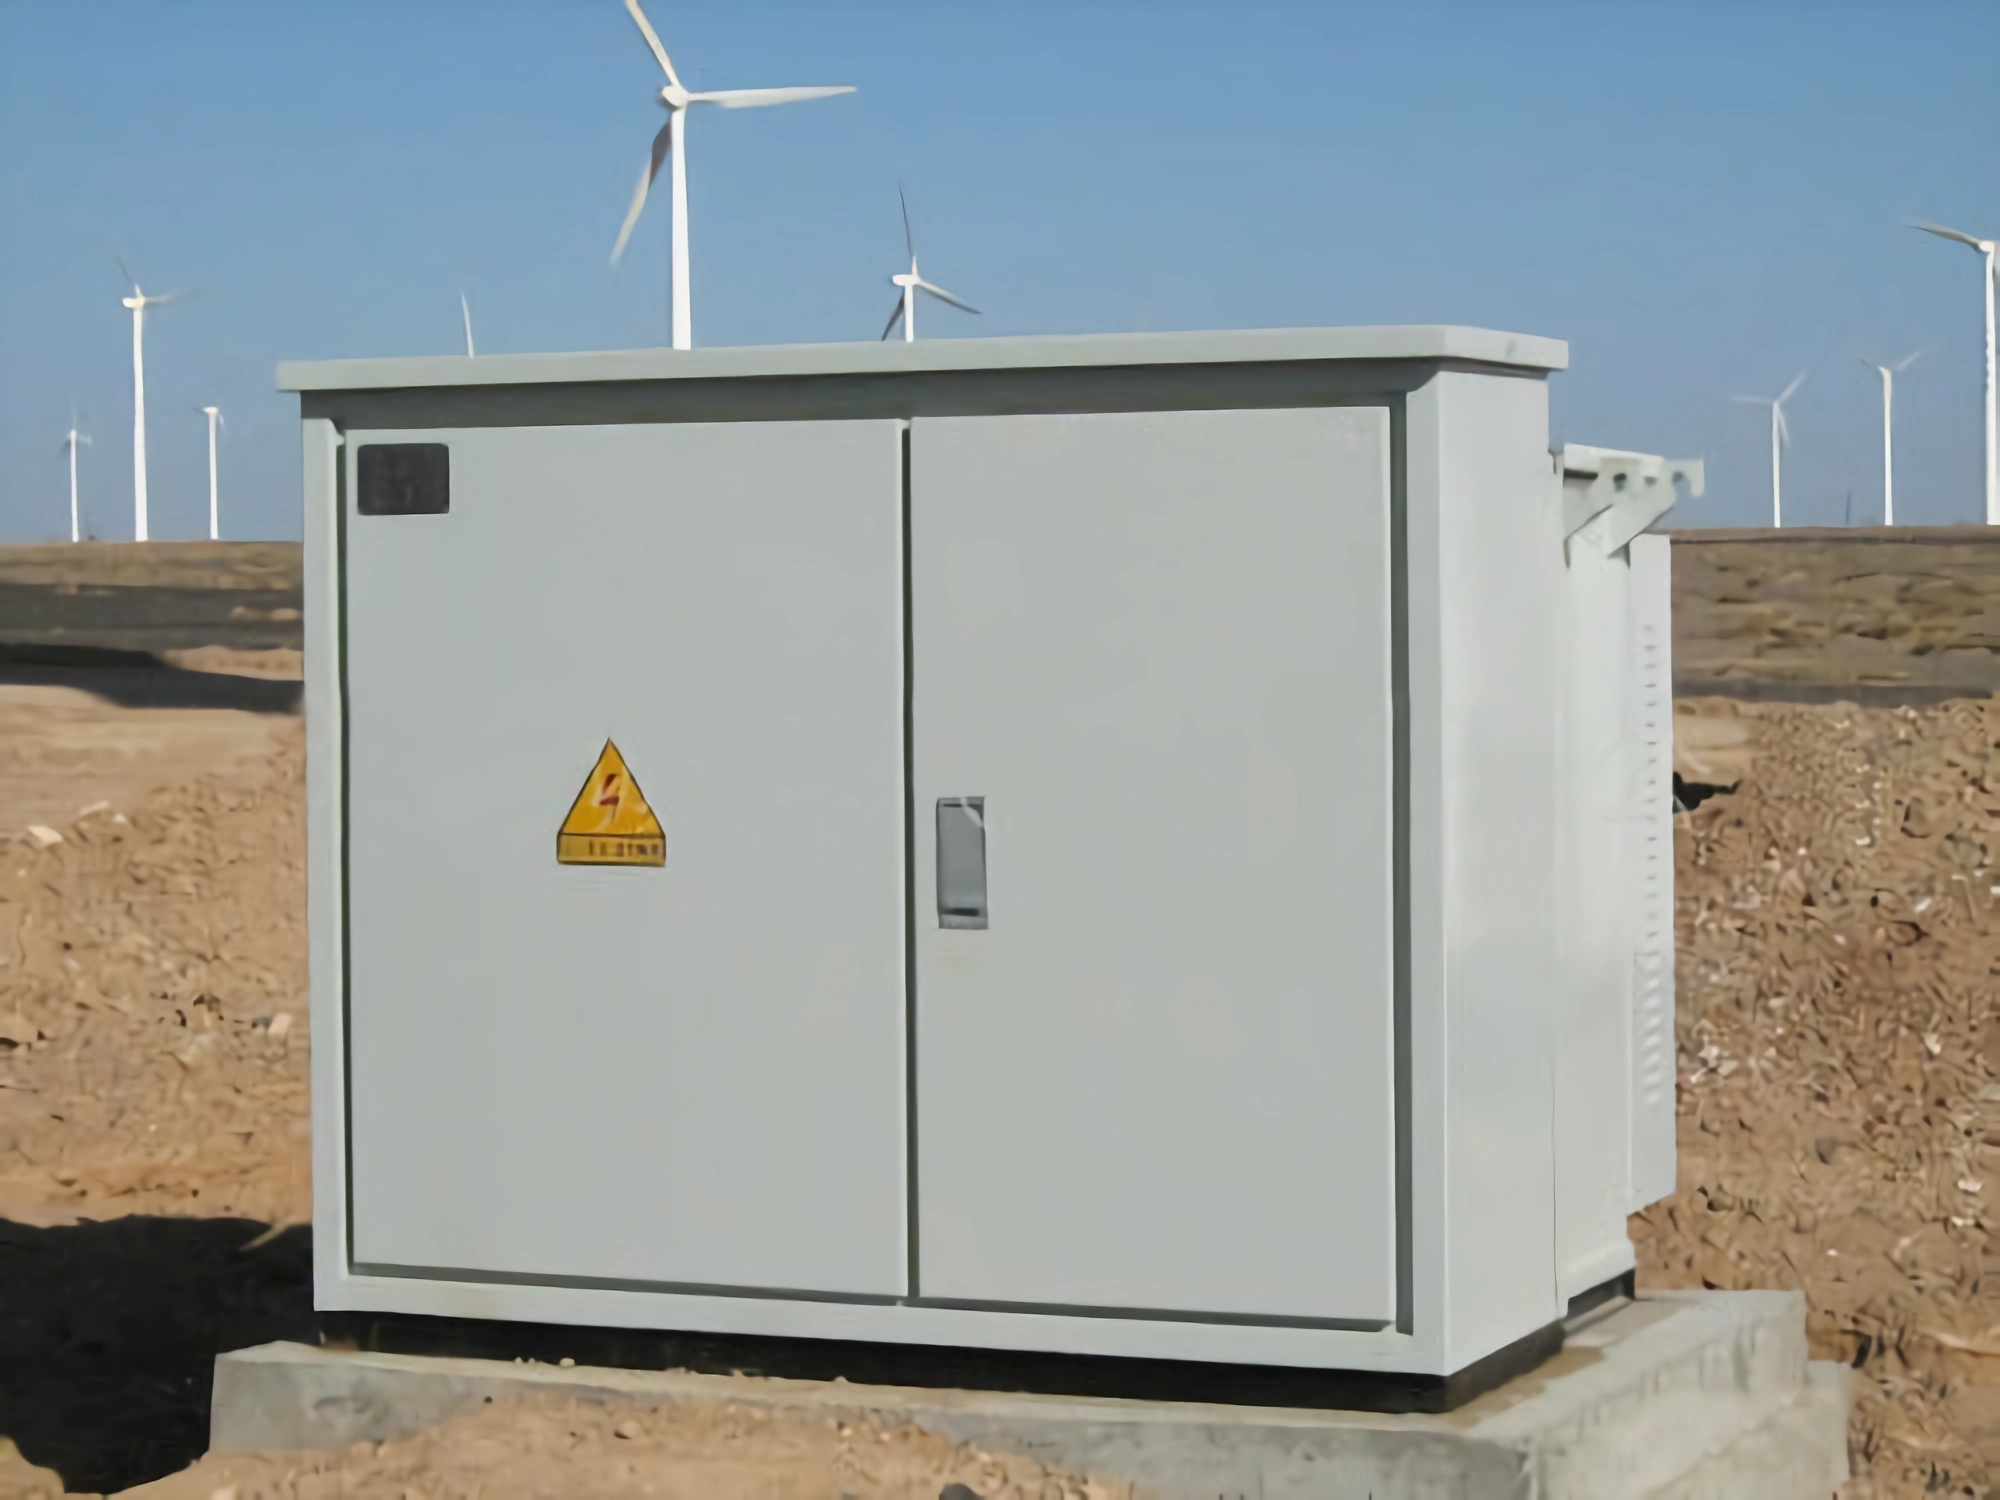 Intelligent Pv/Dedicated Substation For Wind Power Generation